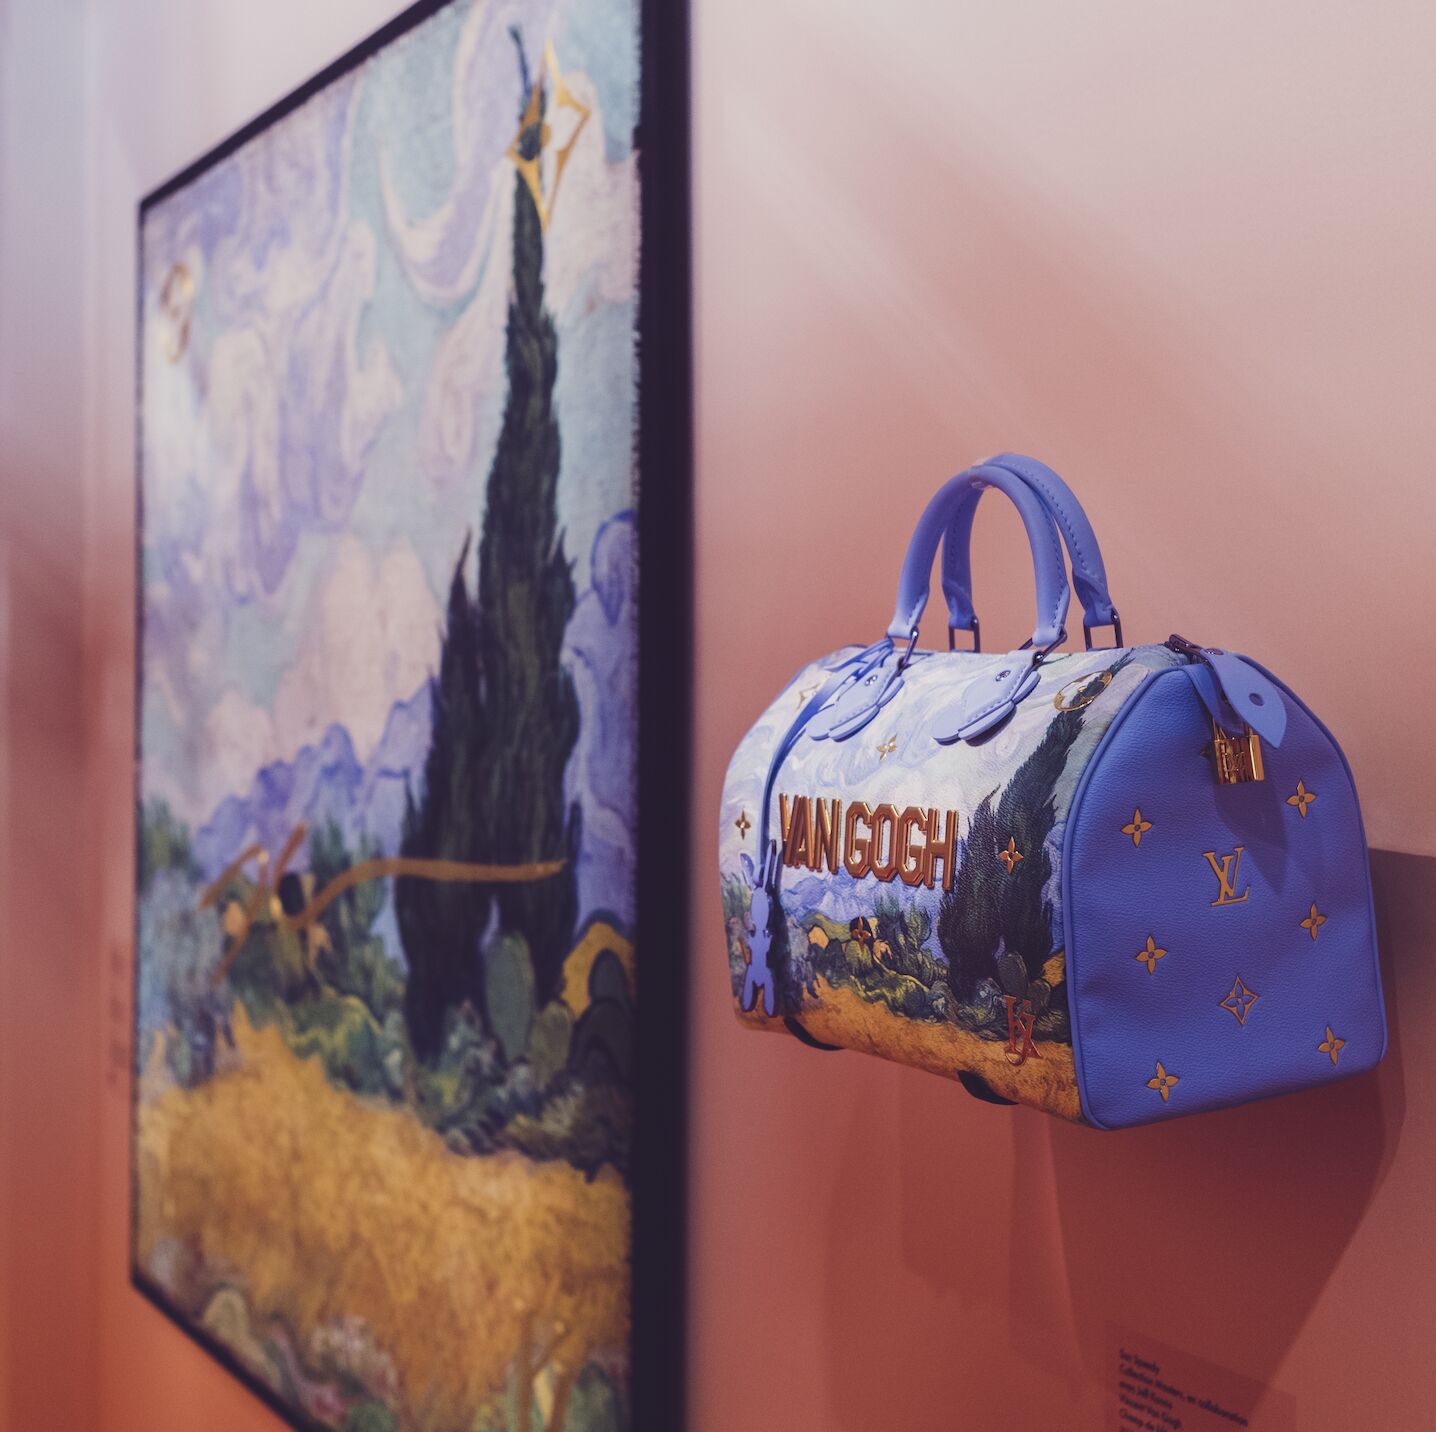 Latest Fashion Brand Updates, Campaigns & Shows  LE MILE Magazine News  Blog - Louis Vuitton Editions Pop-Up at Art Basel: An Artistic Journey into  Luxury - LE MILE